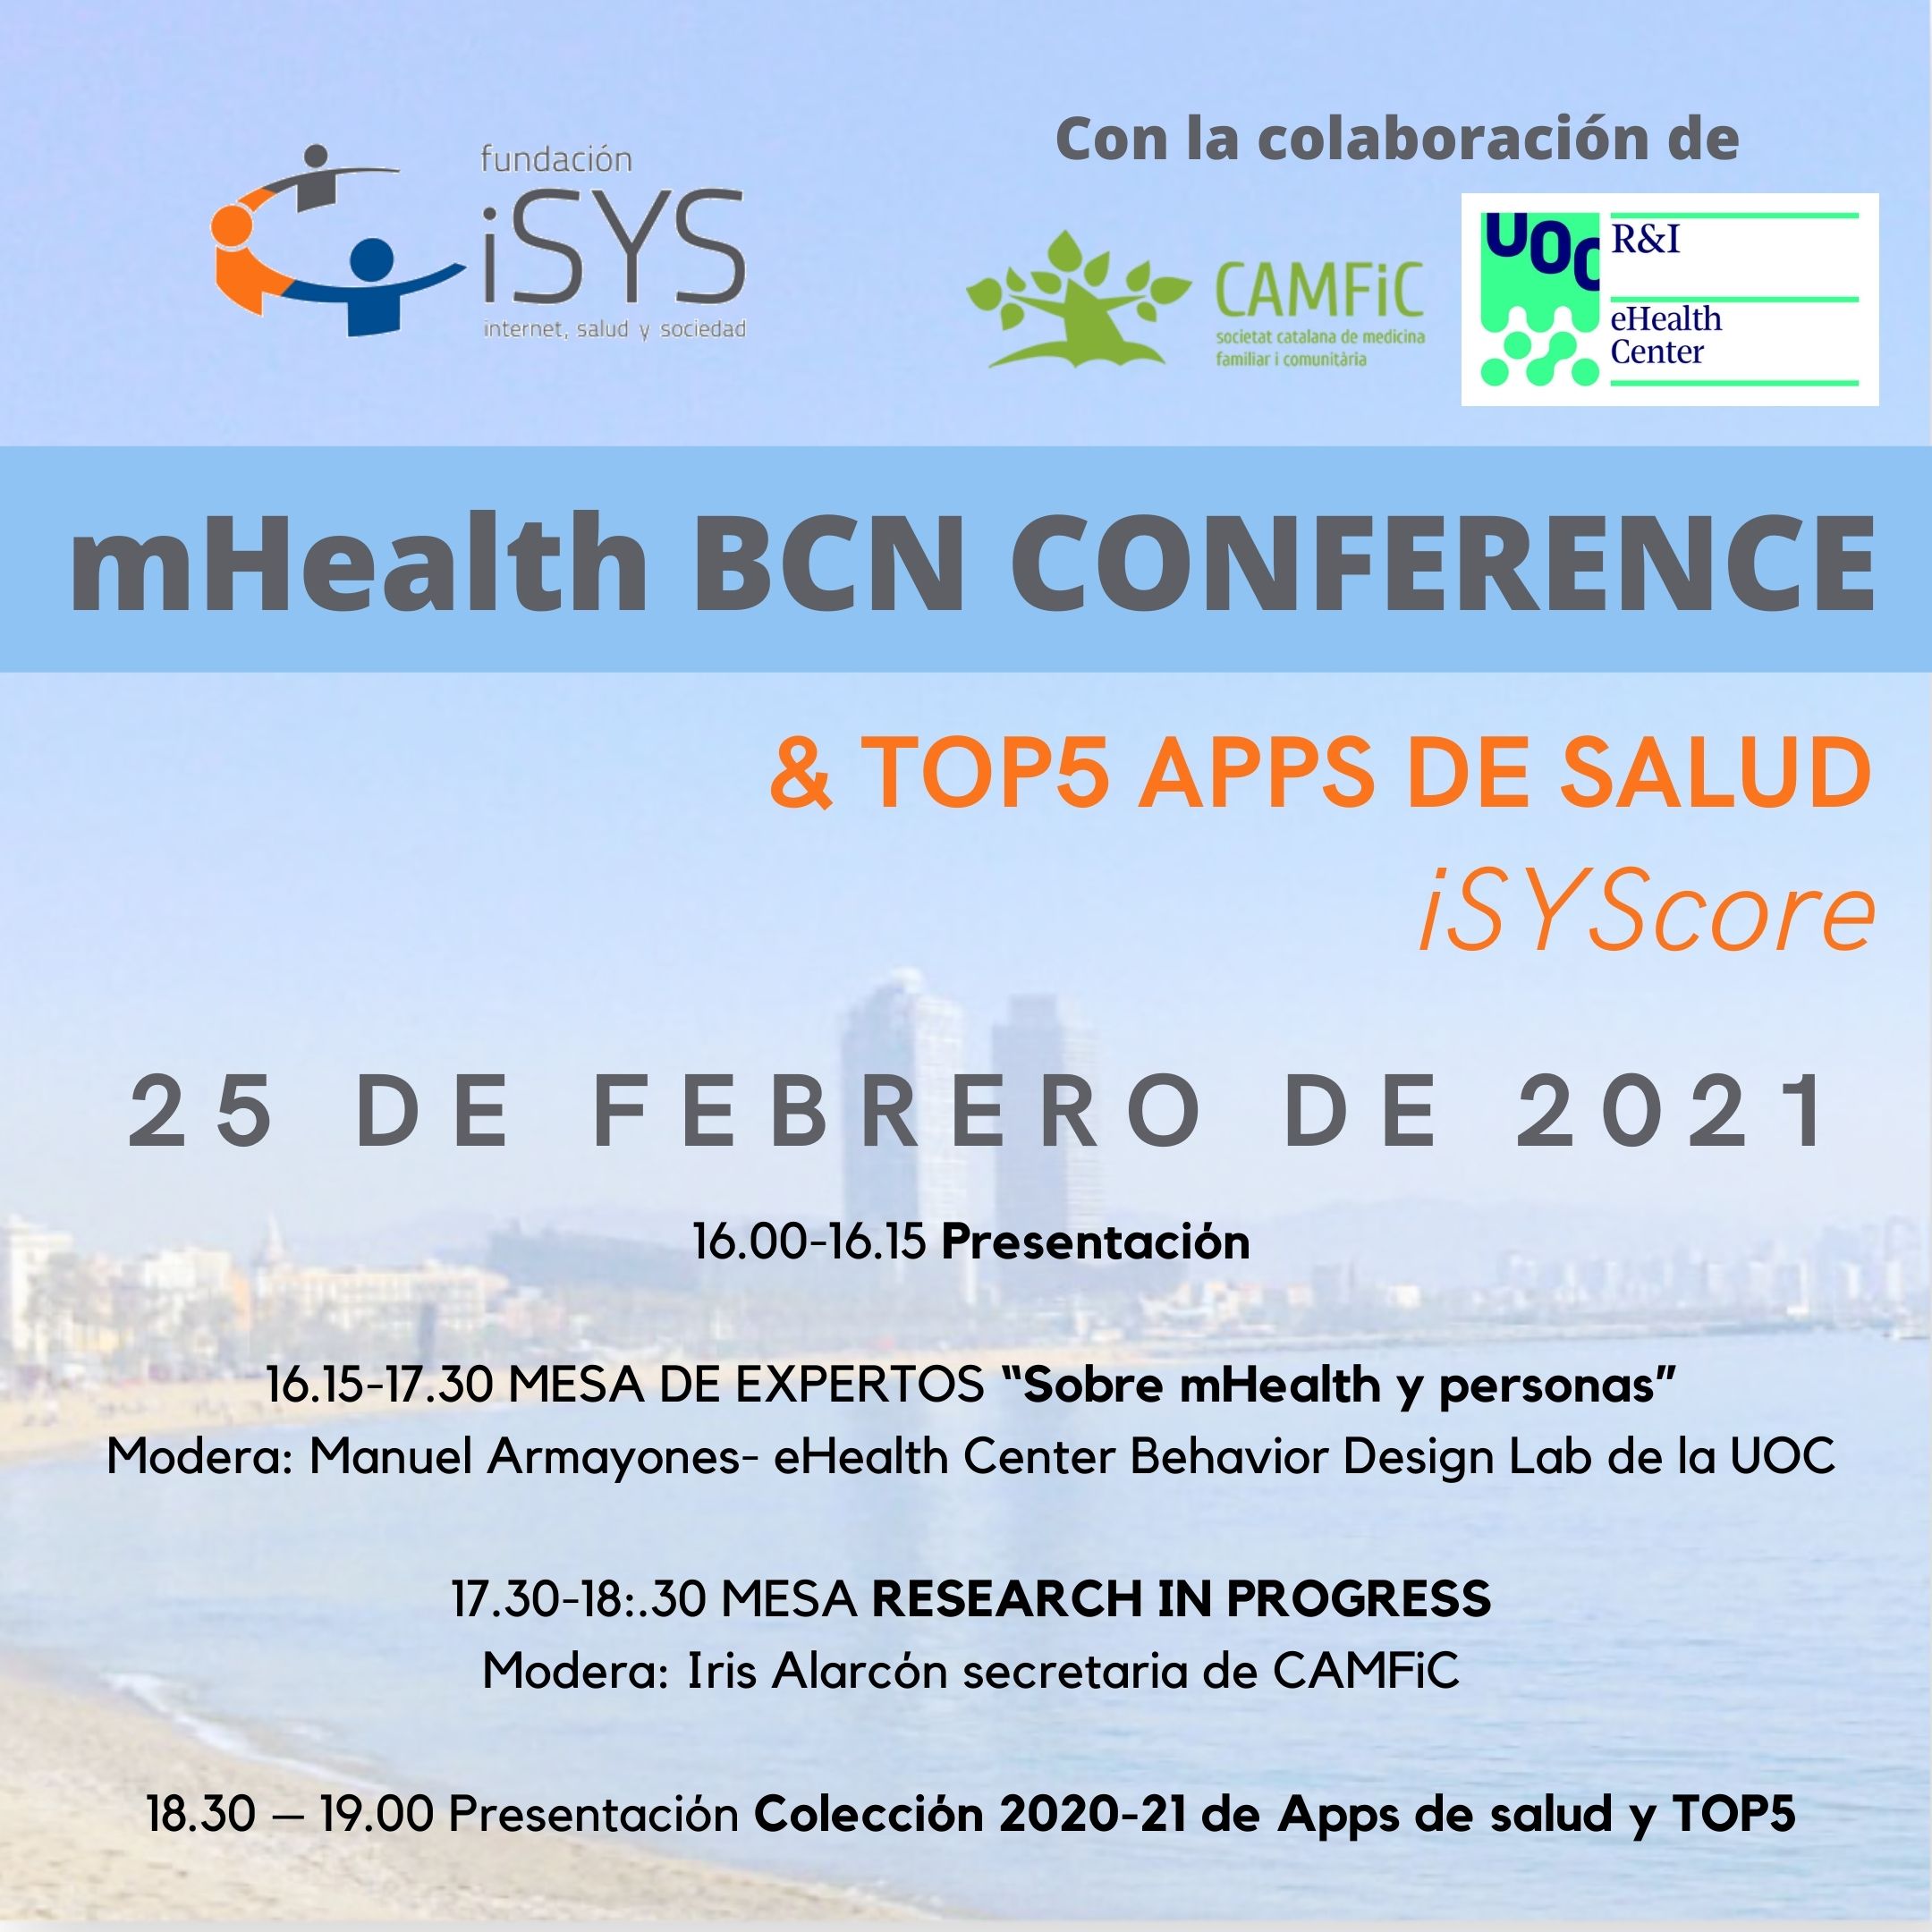 mhealthBCNConference 2021 intro